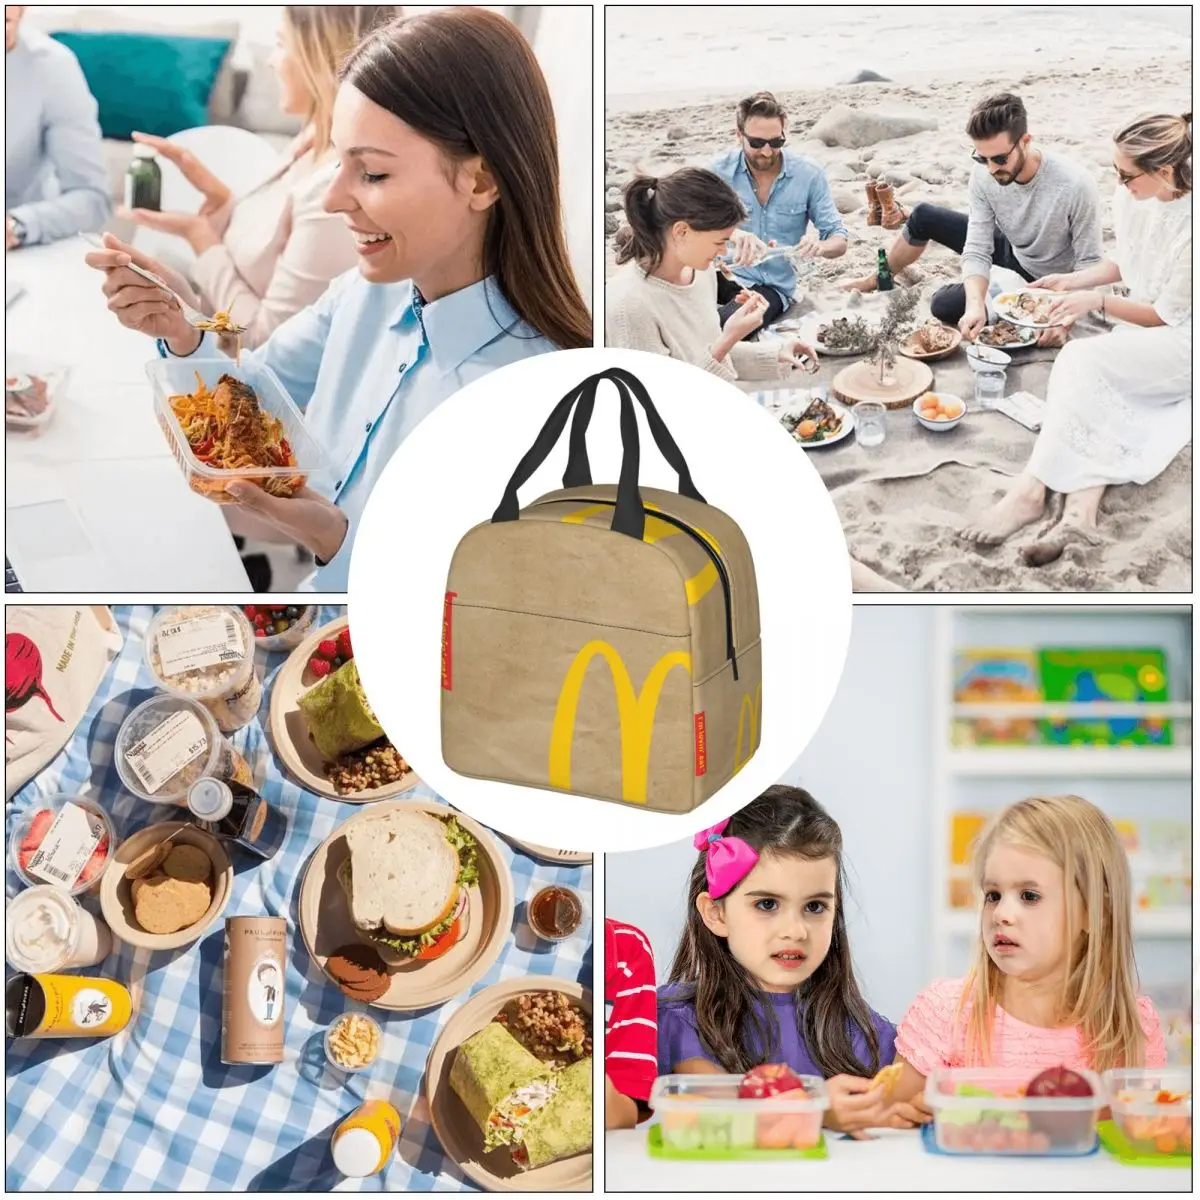 Unique Design Lunch Bags Portable Insulated Oxford Cooler Thermal Cold Food Picnic Tote New Arrival images - 6